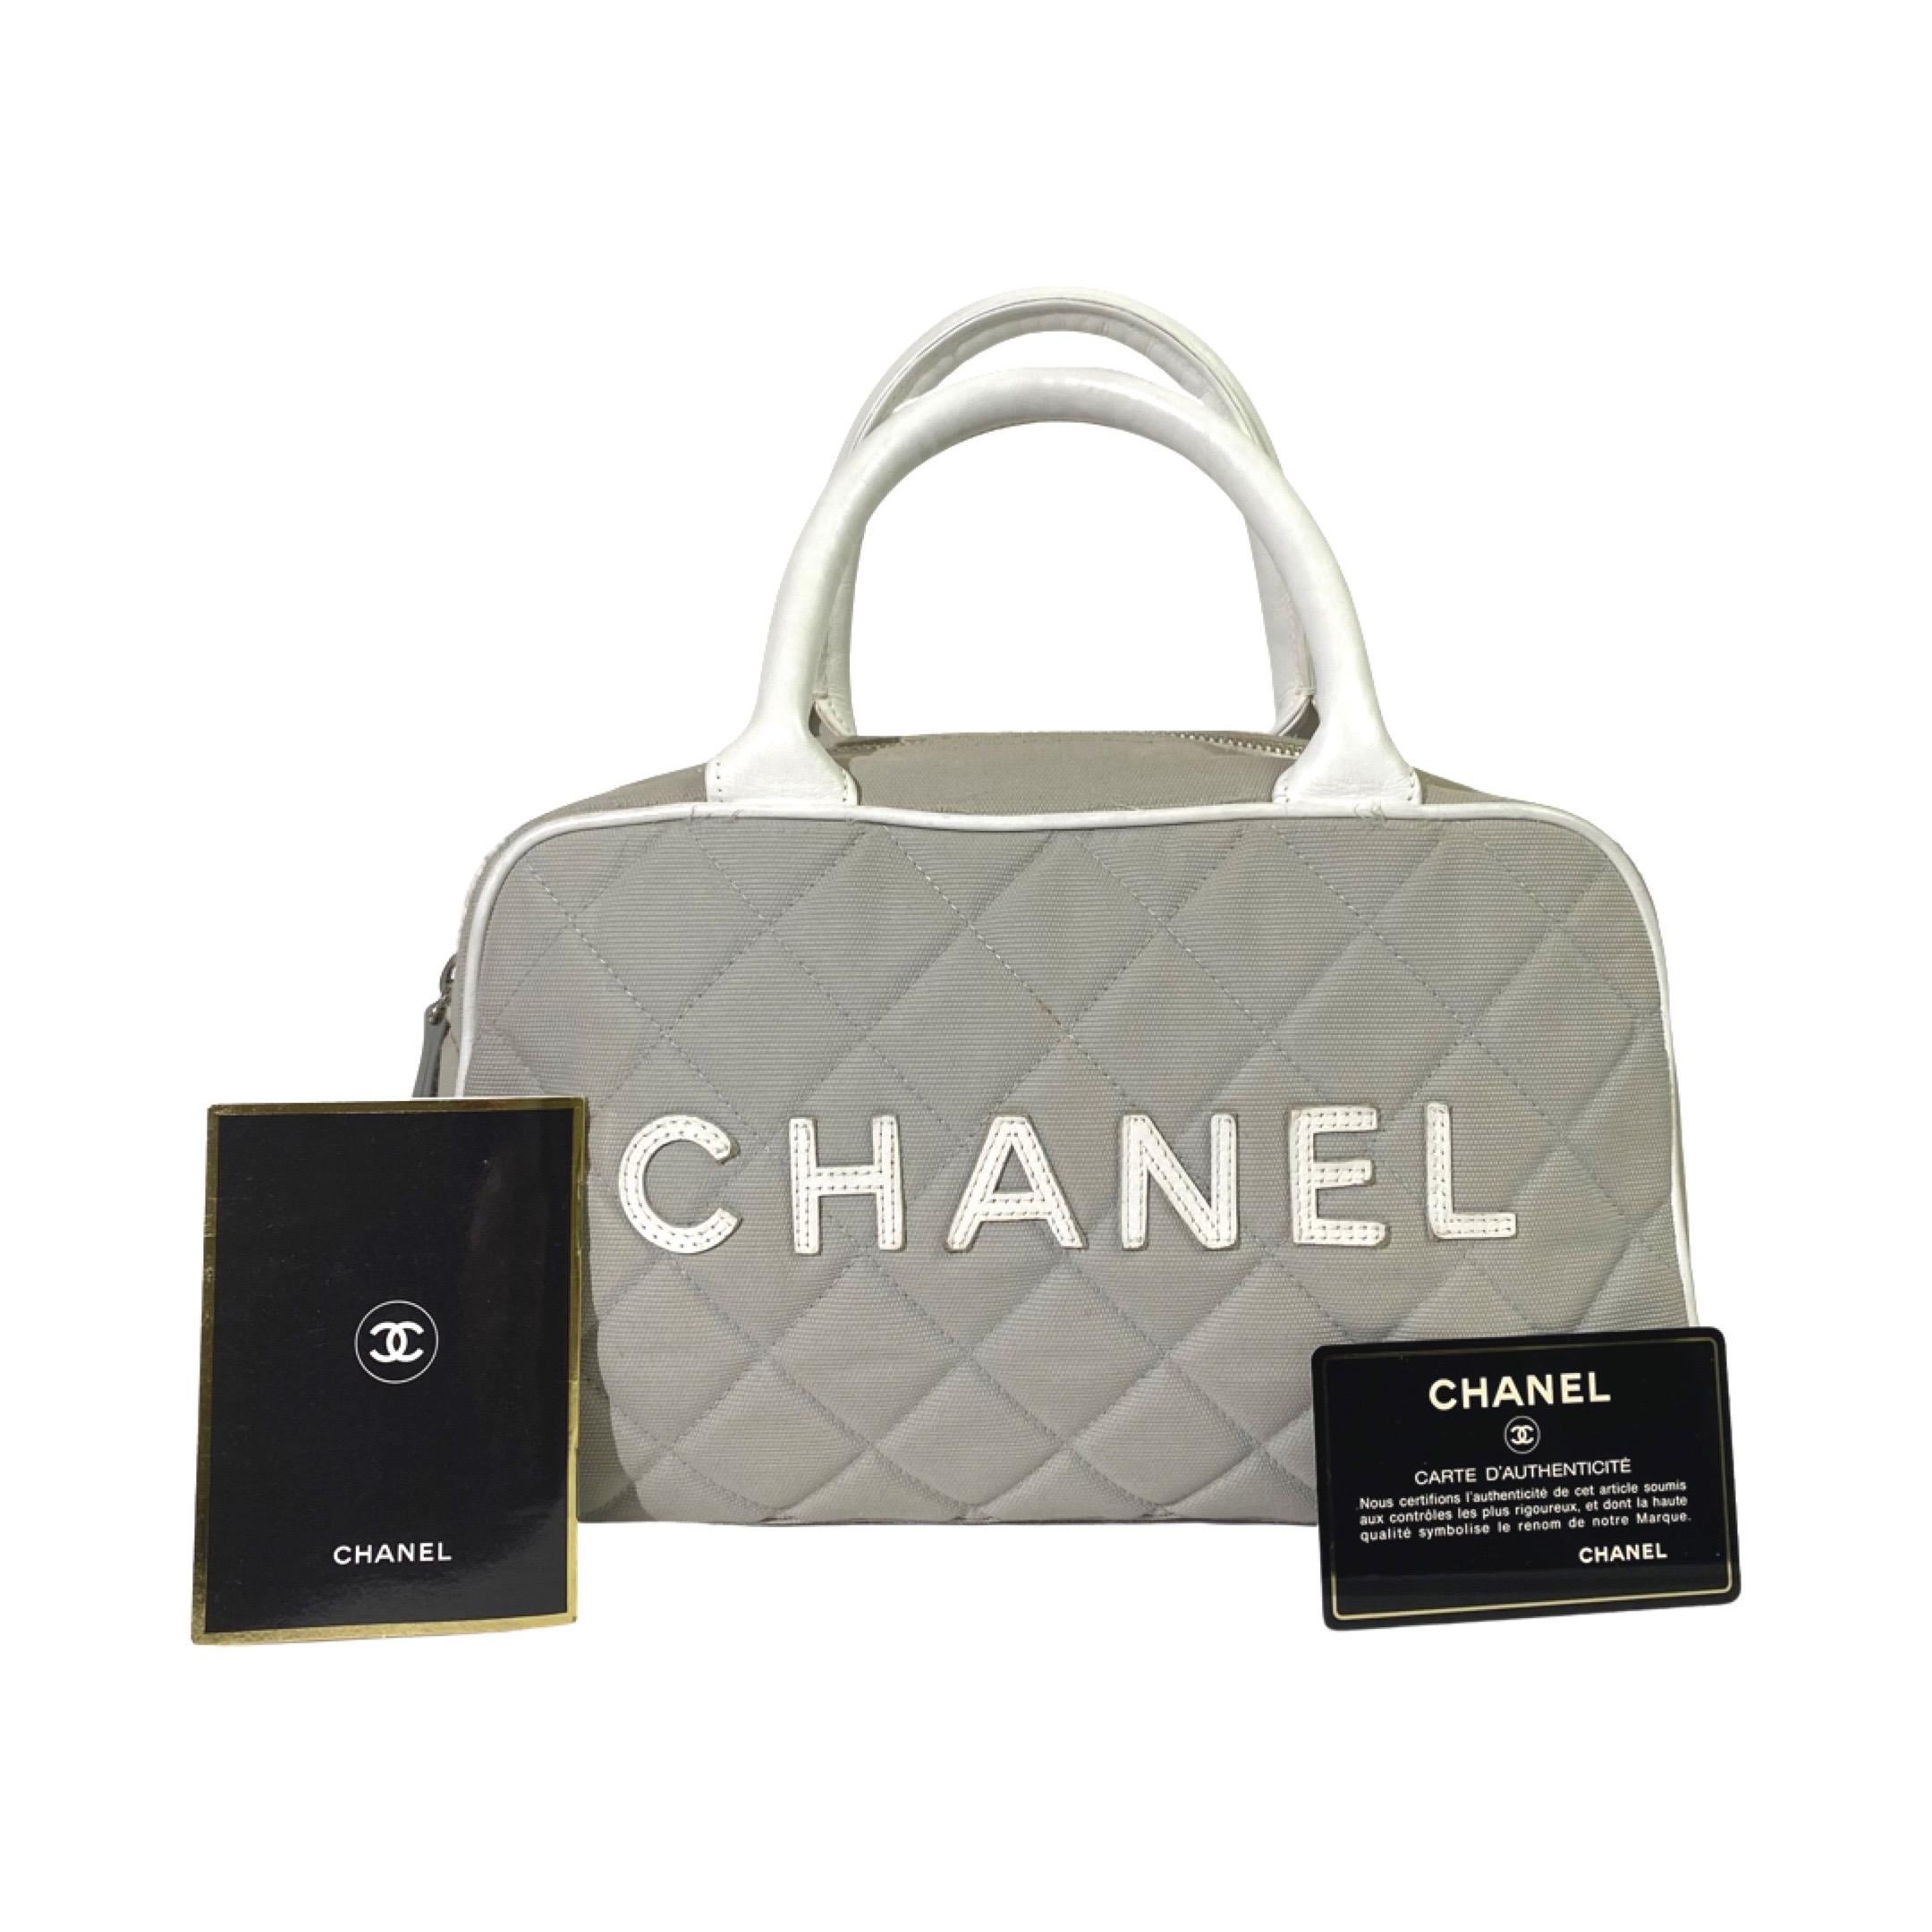 Chanel 2000s Sport Gray Quilted Canvas Mini Handbag In Good Condition For Sale In Los Angeles, CA